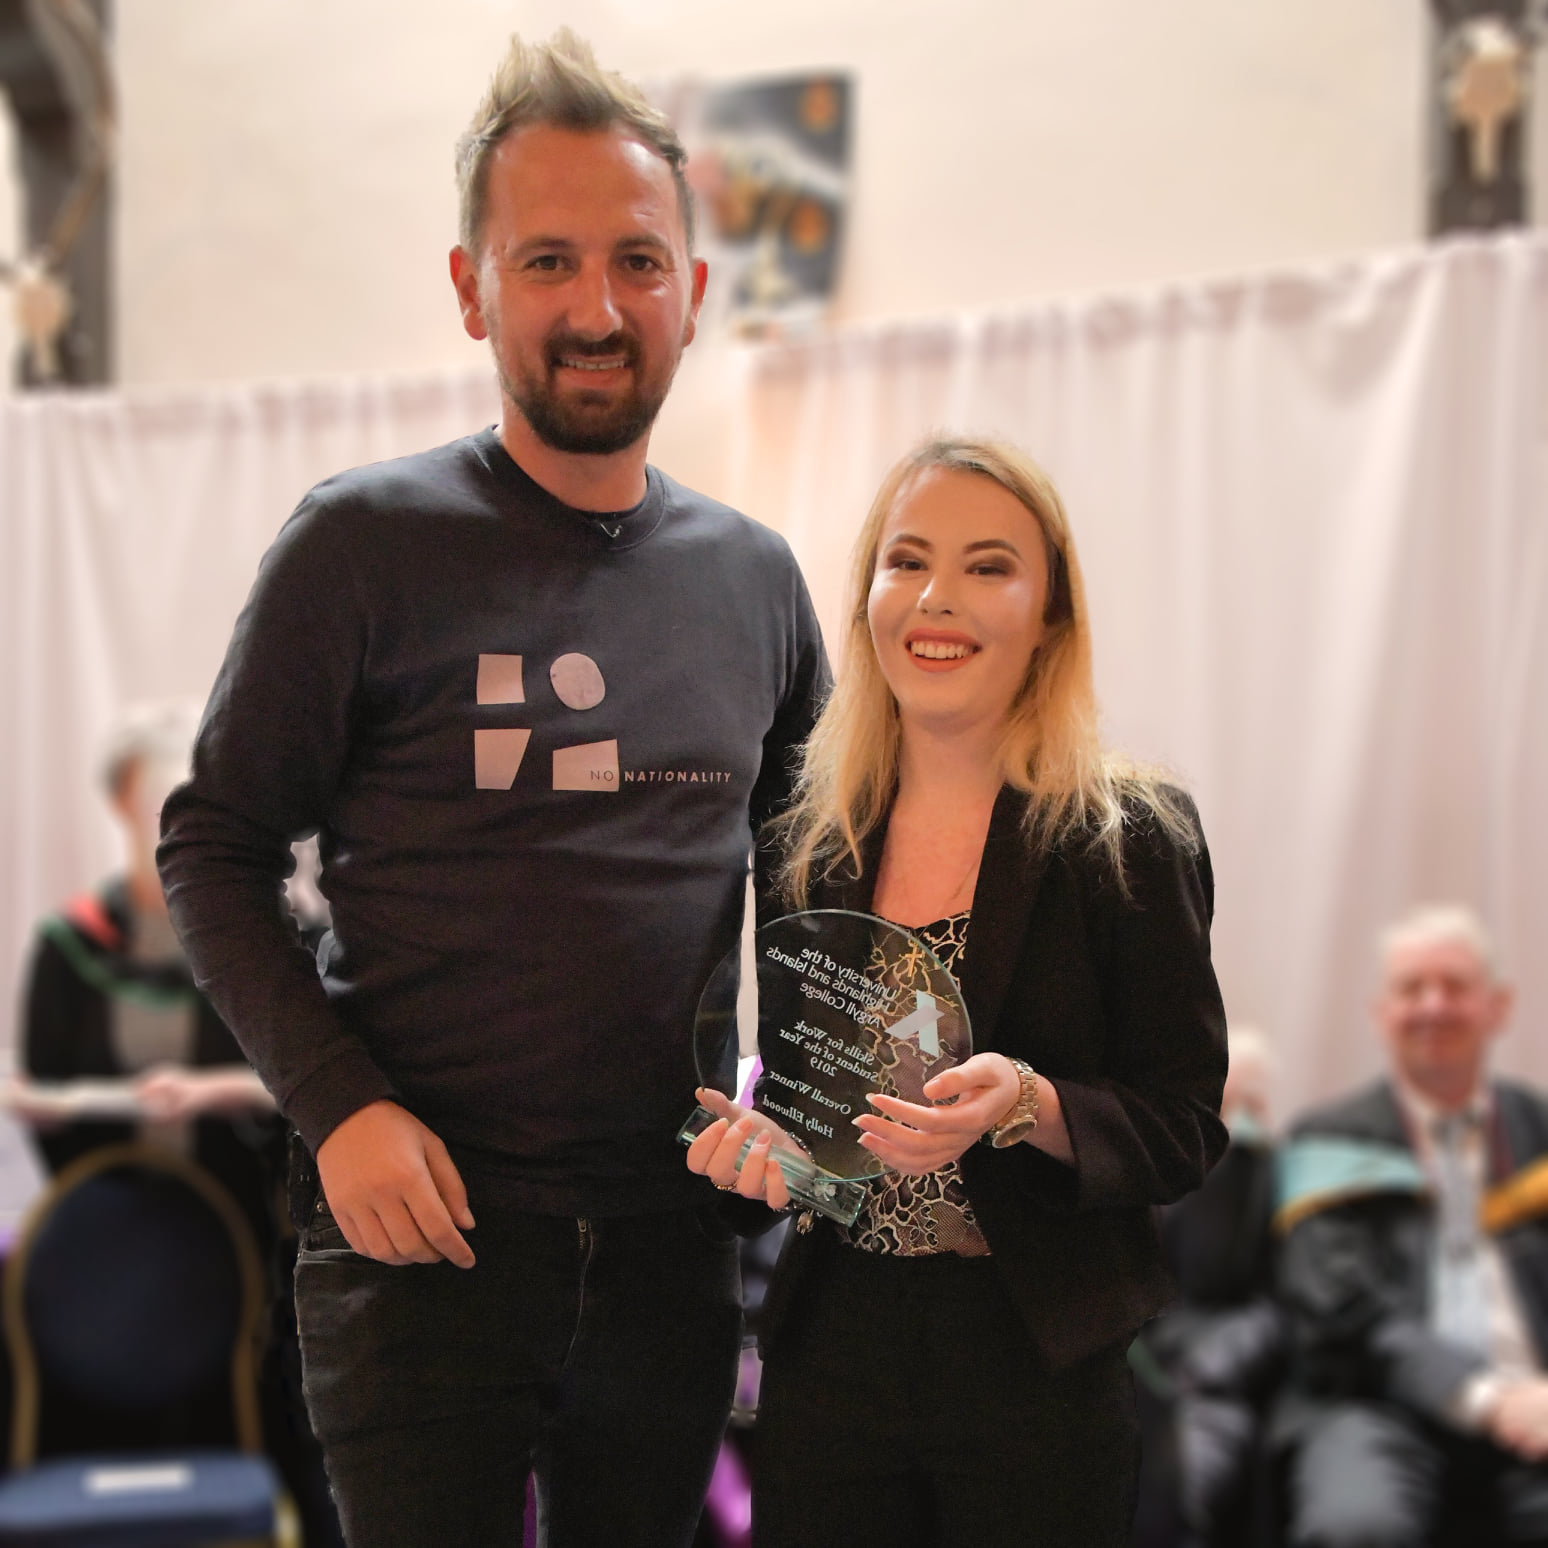 Holly Ellwood winner of Schools Link Student of the Year 2019 collecting her award